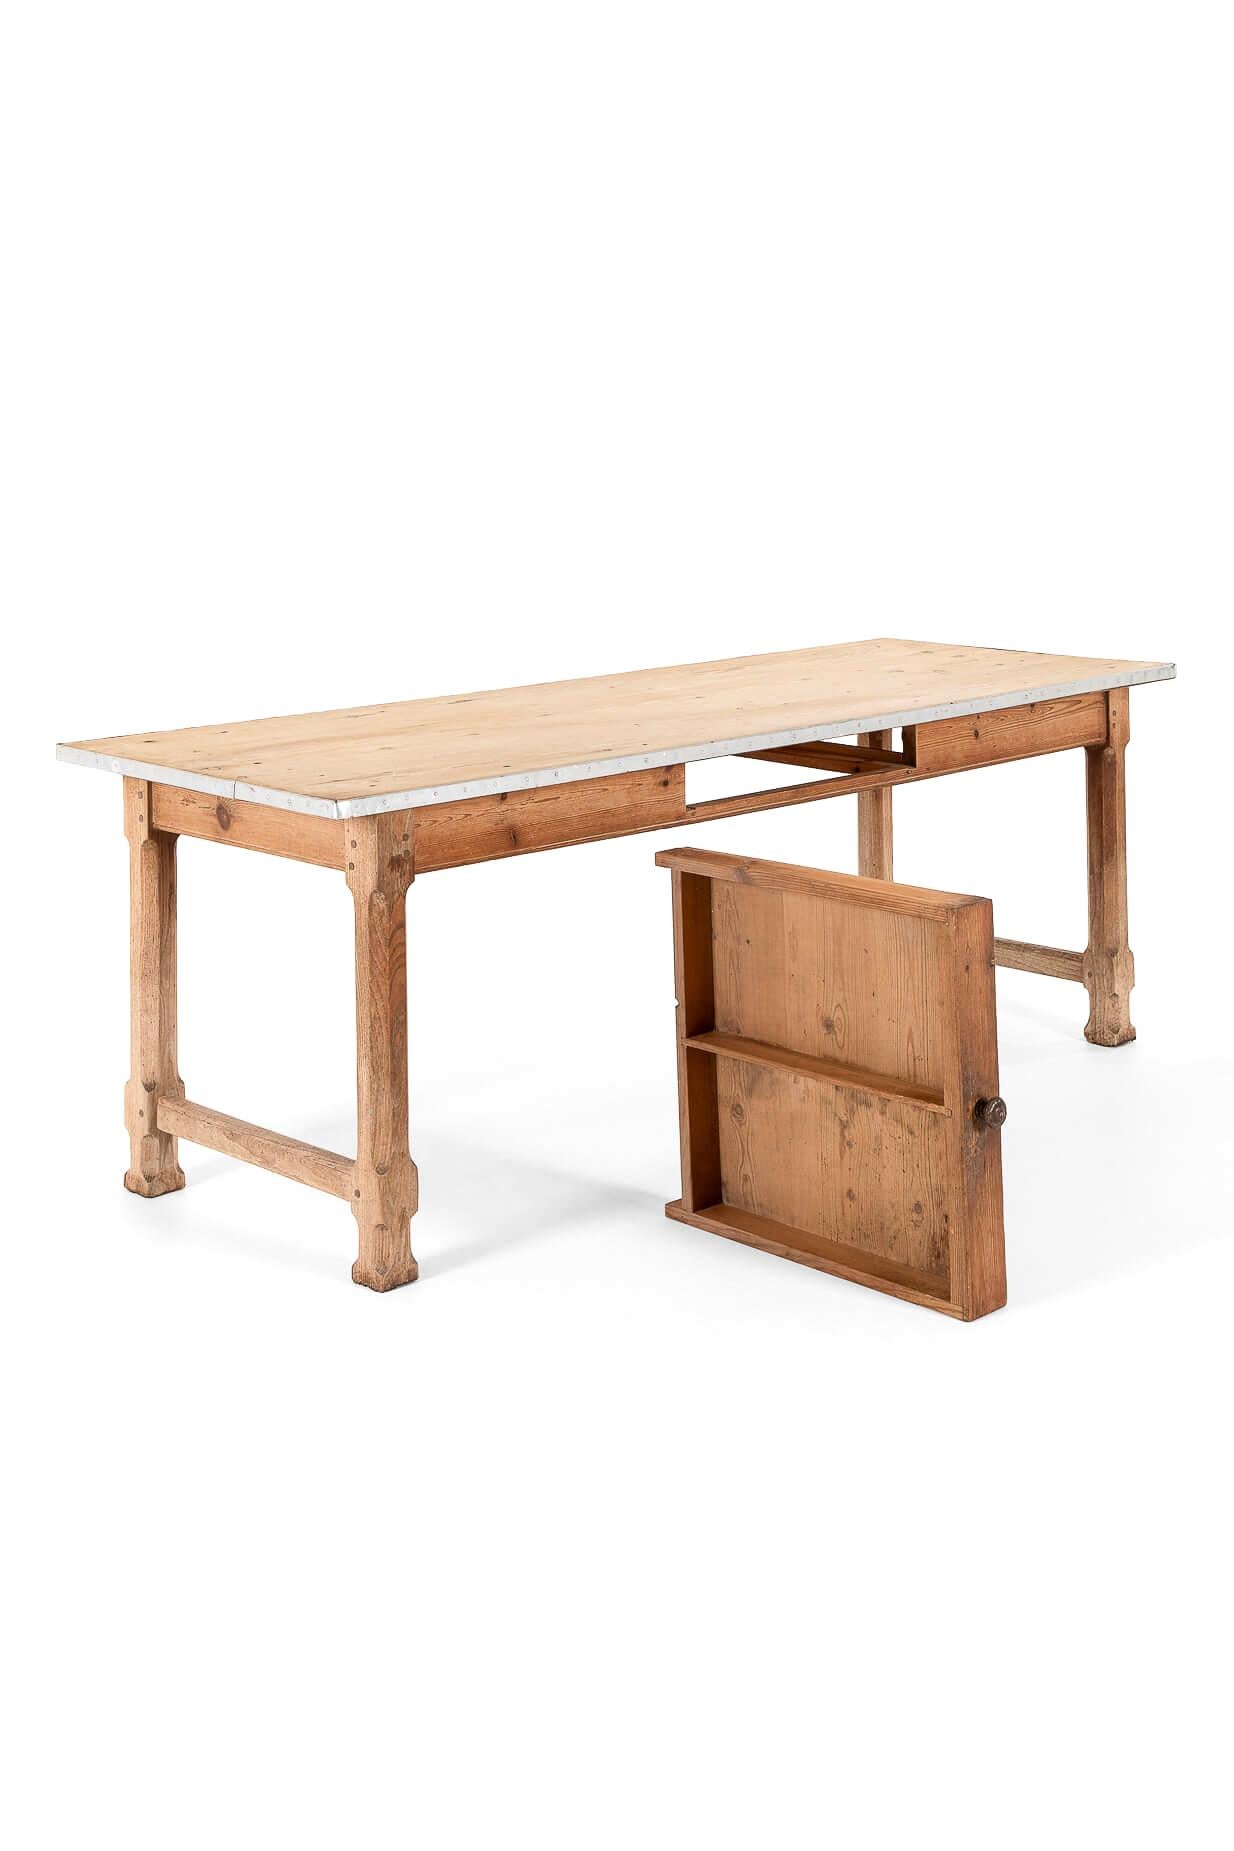 French Provincial French Farmhouse Table For Sale